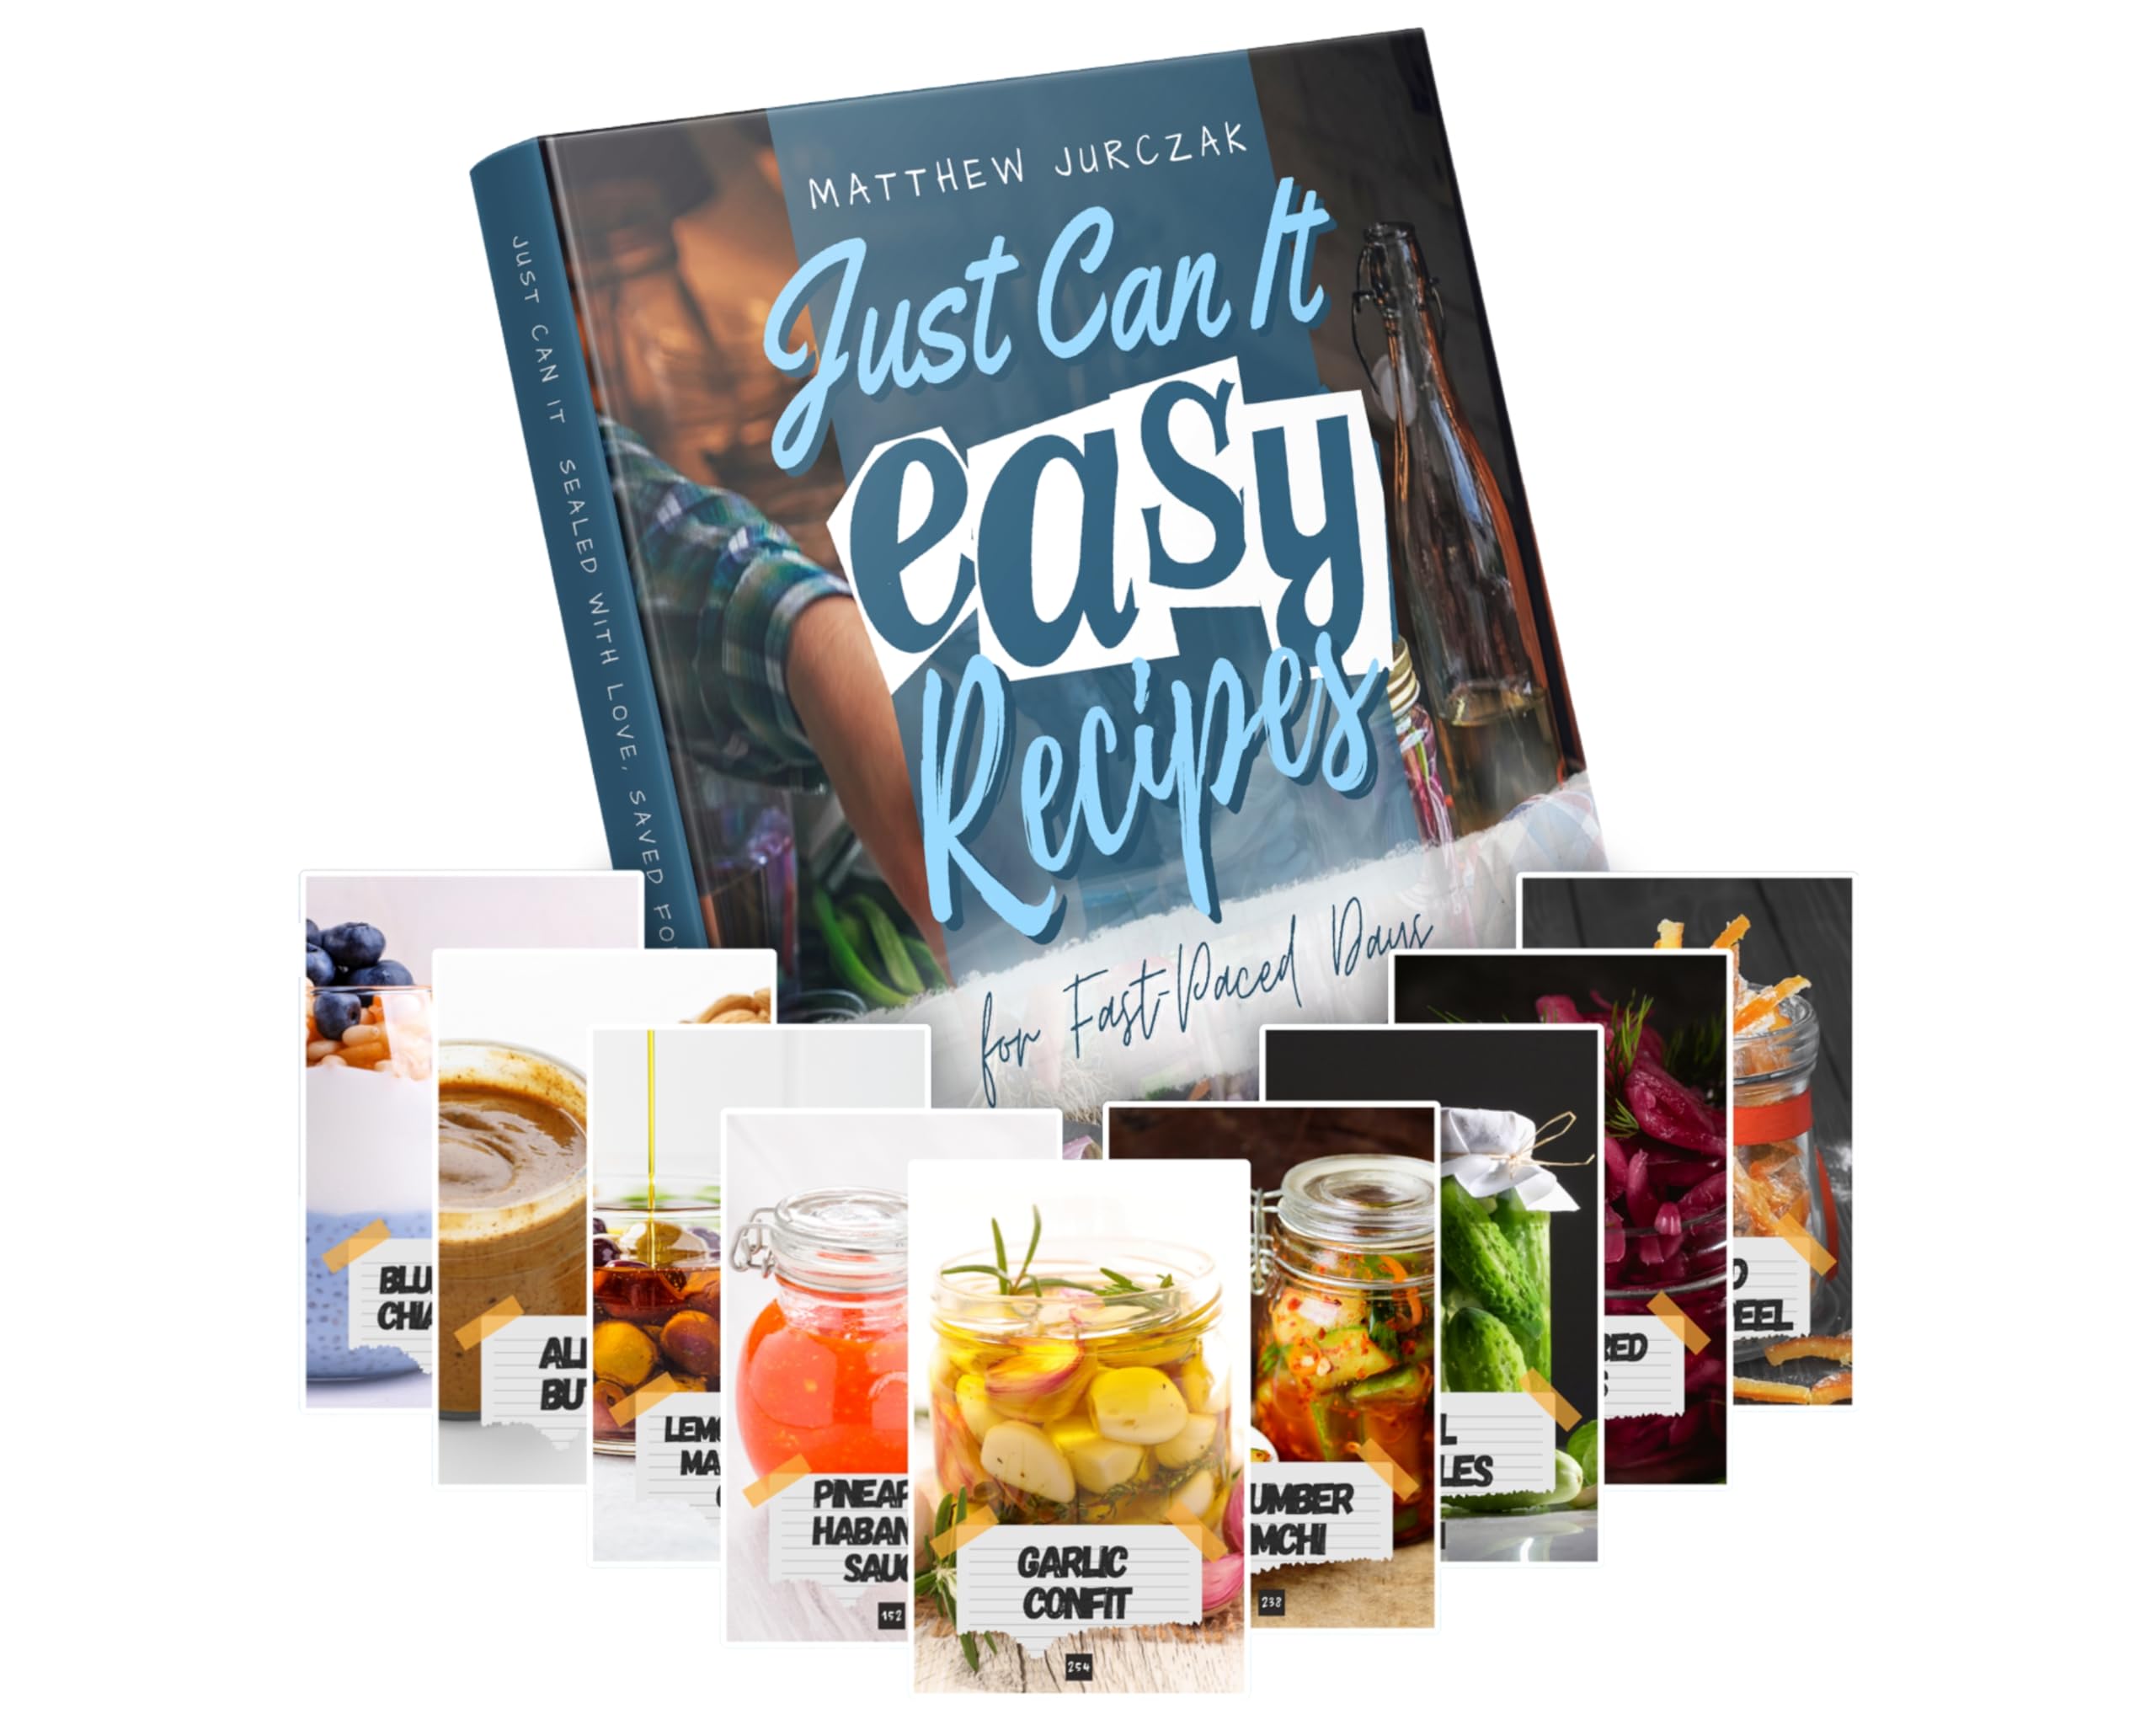 Just Can It! A Comprehensive Guide to Over 100 Home Canning, Pickling, and Preserving Recipes: From Fruit Jams to Meat Delicacies: Unleash the Full Potential of Your Pantry for Year-Round Freshness.